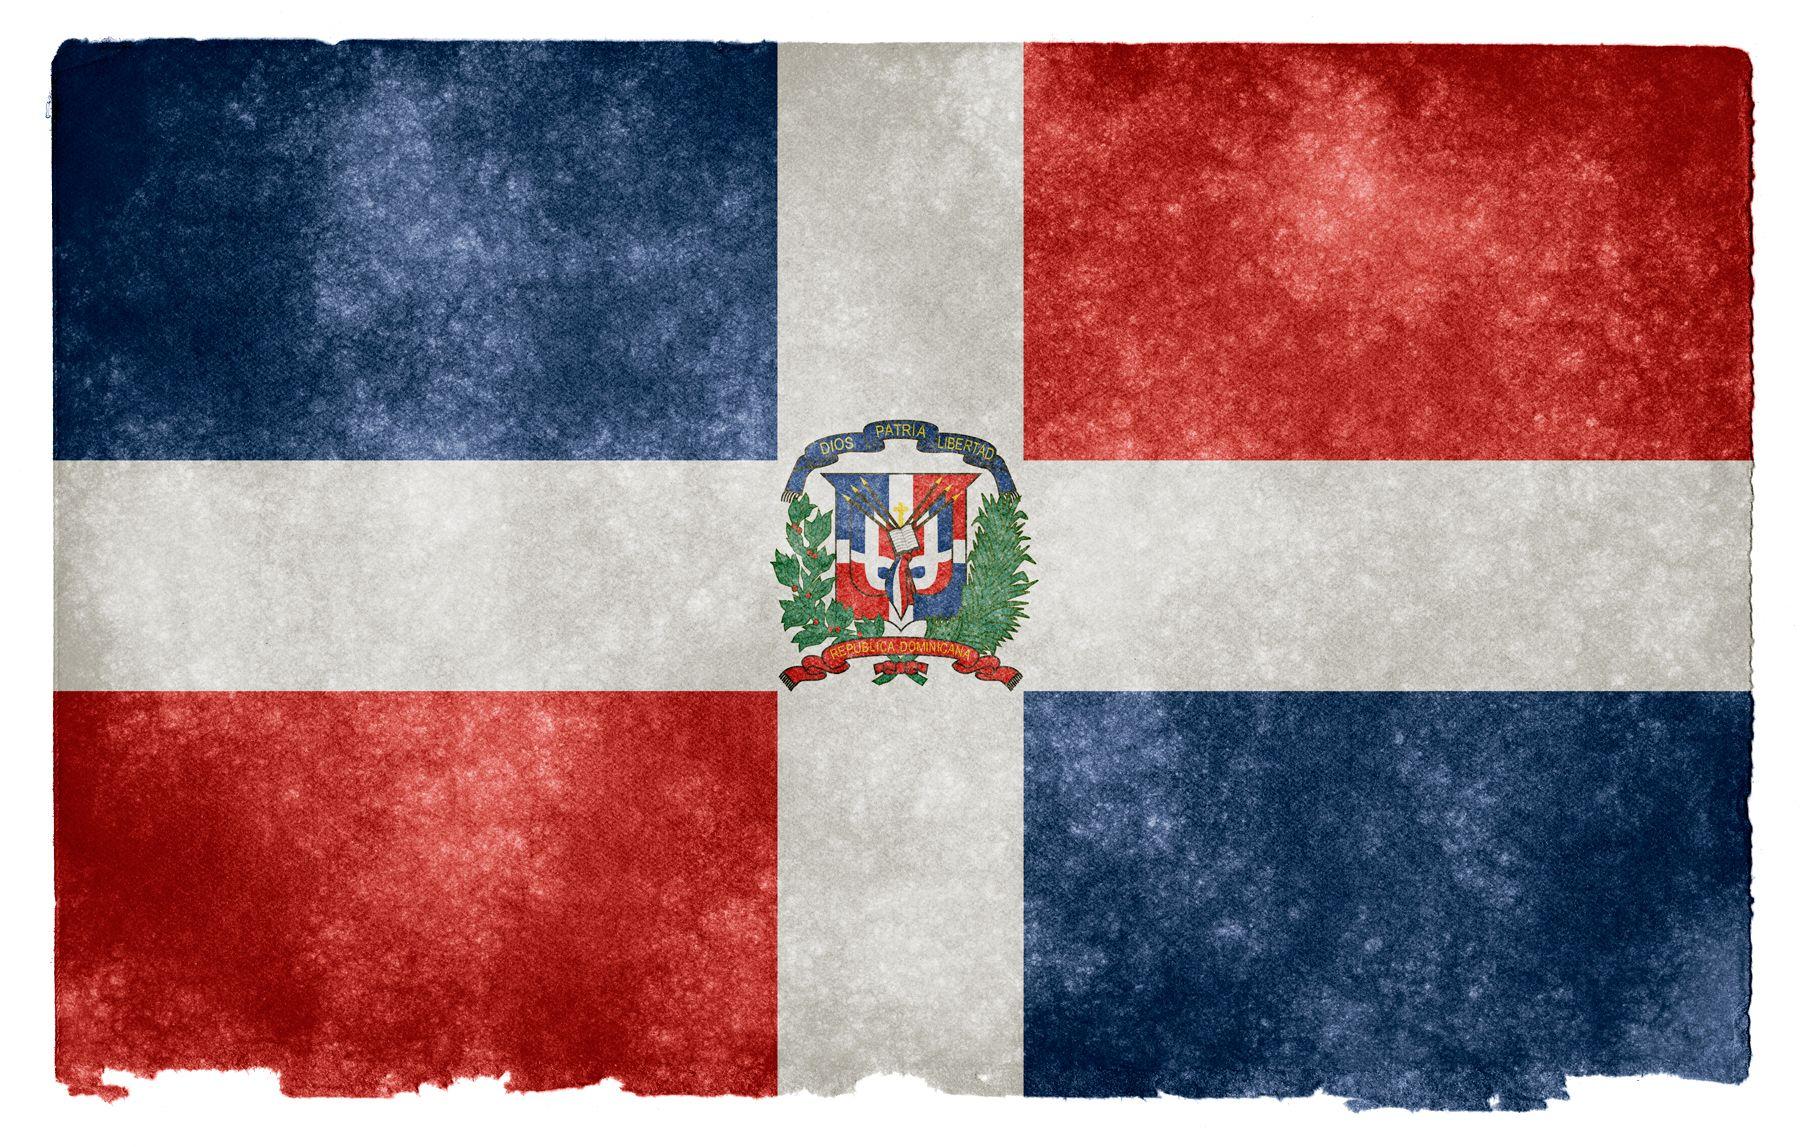 Details more than 63 dominican flag wallpaper - in.cdgdbentre